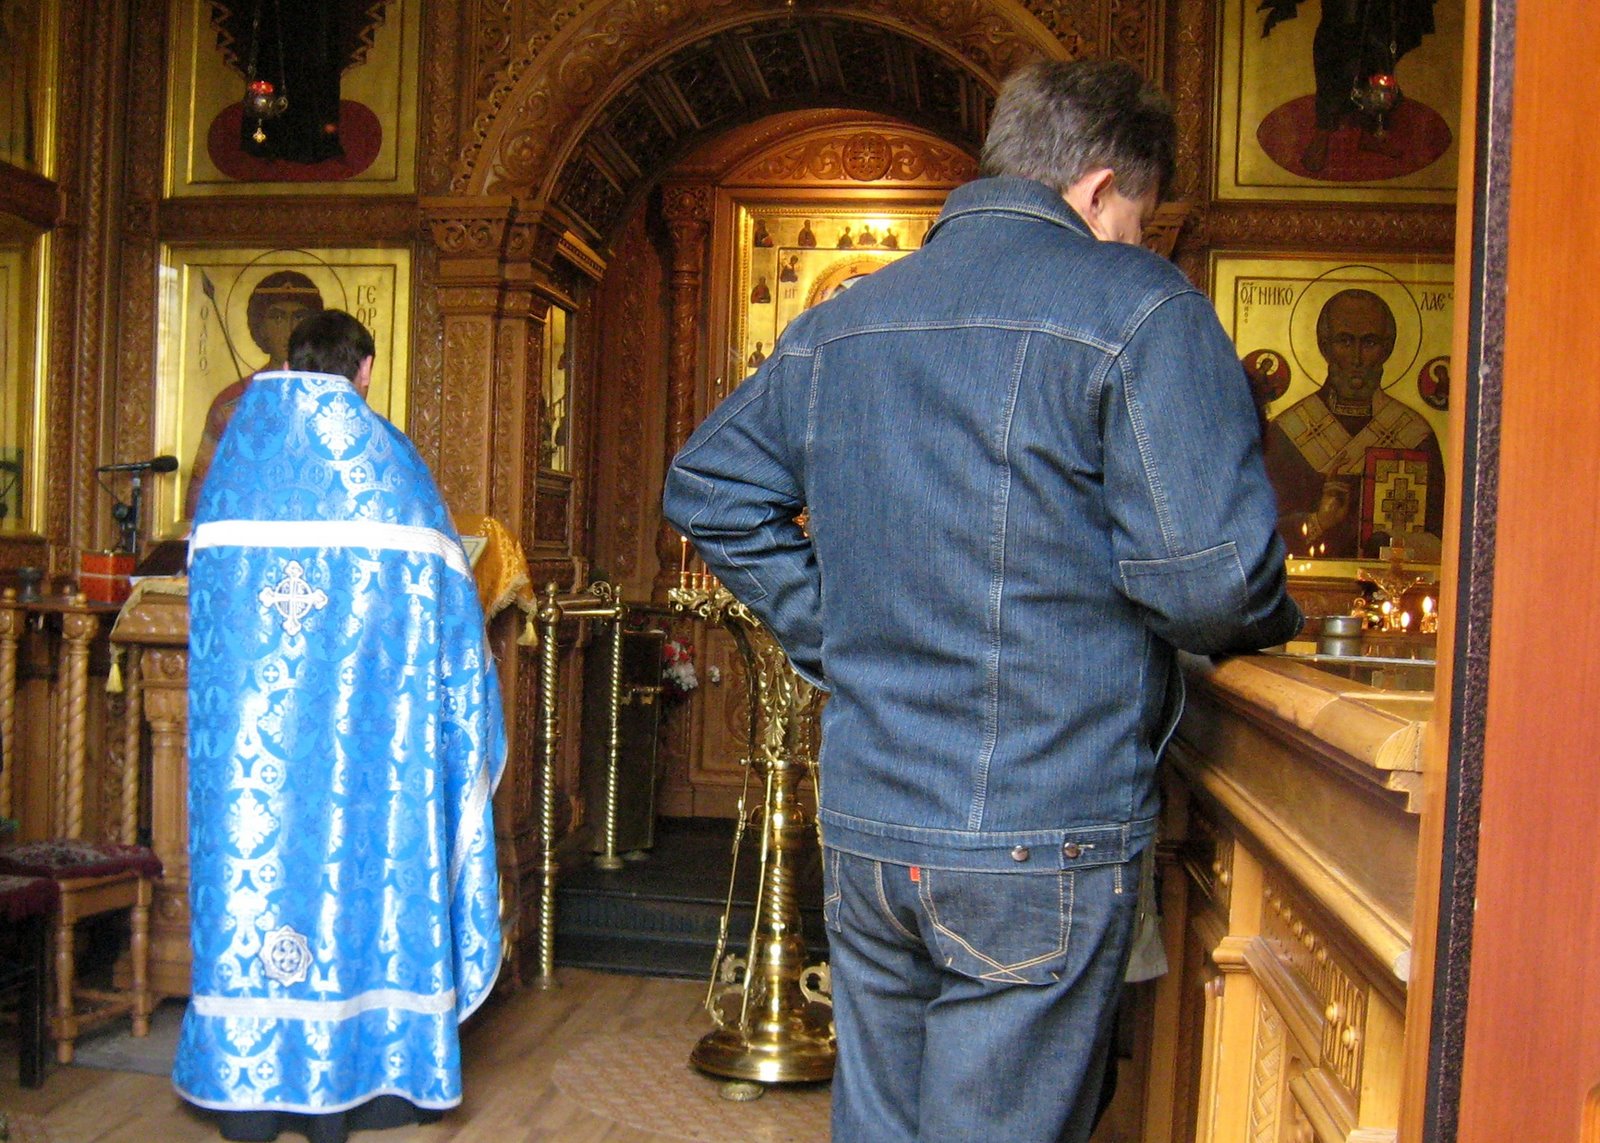 [Moscow_RomanovVisit_RedSquare_RussianOrthodoxPriest.jpg]